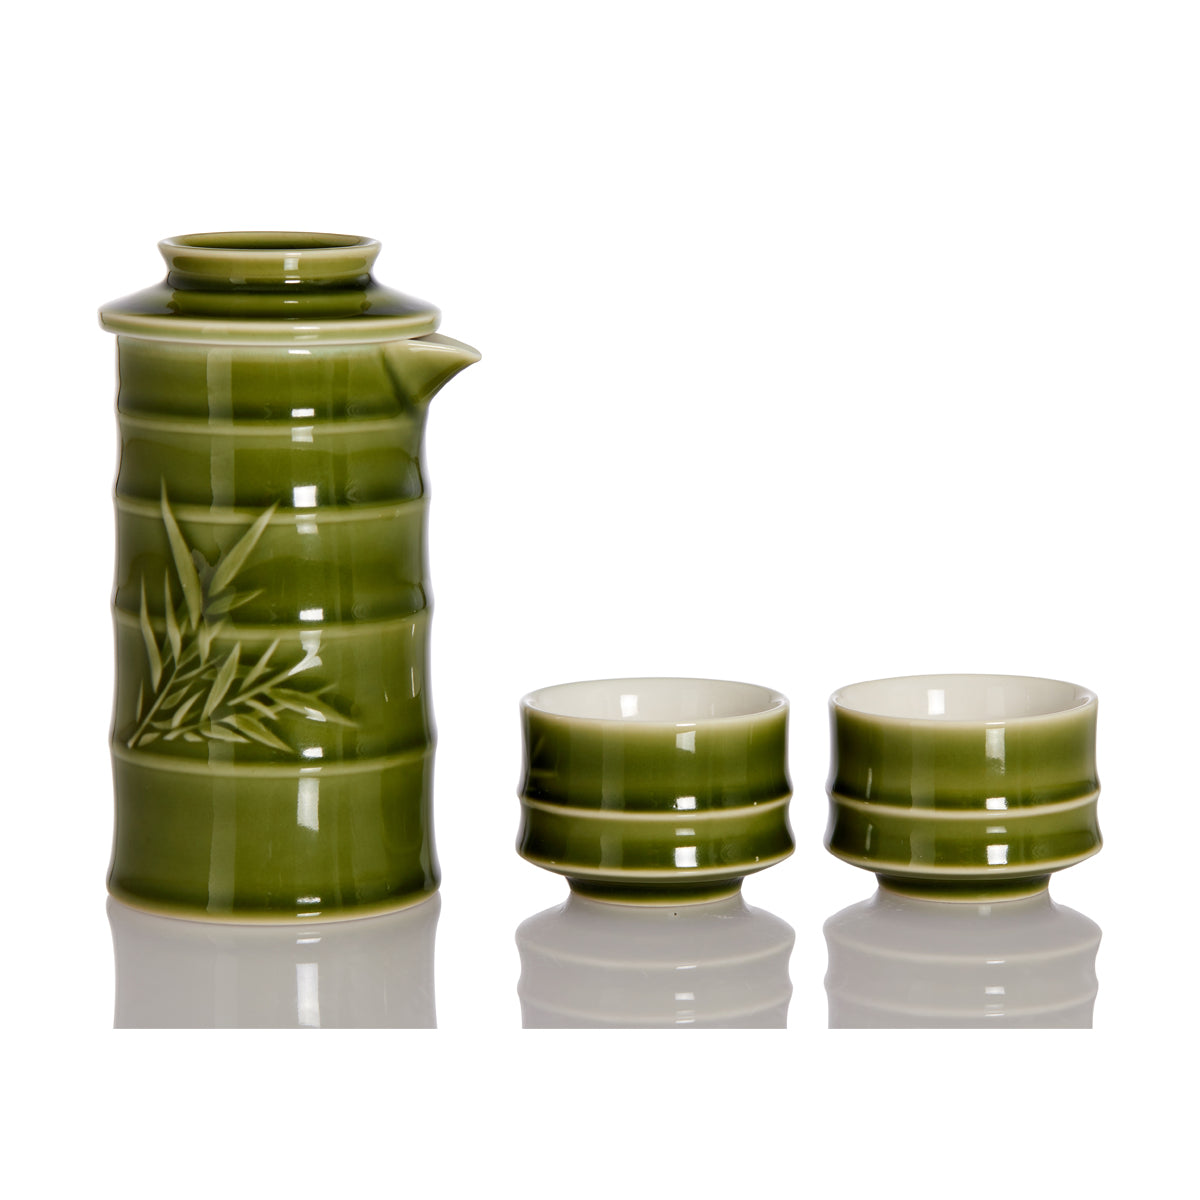 Bamboo Kung Fu Tea Set 1 Pot With 2 Cups - Olive Green Acera